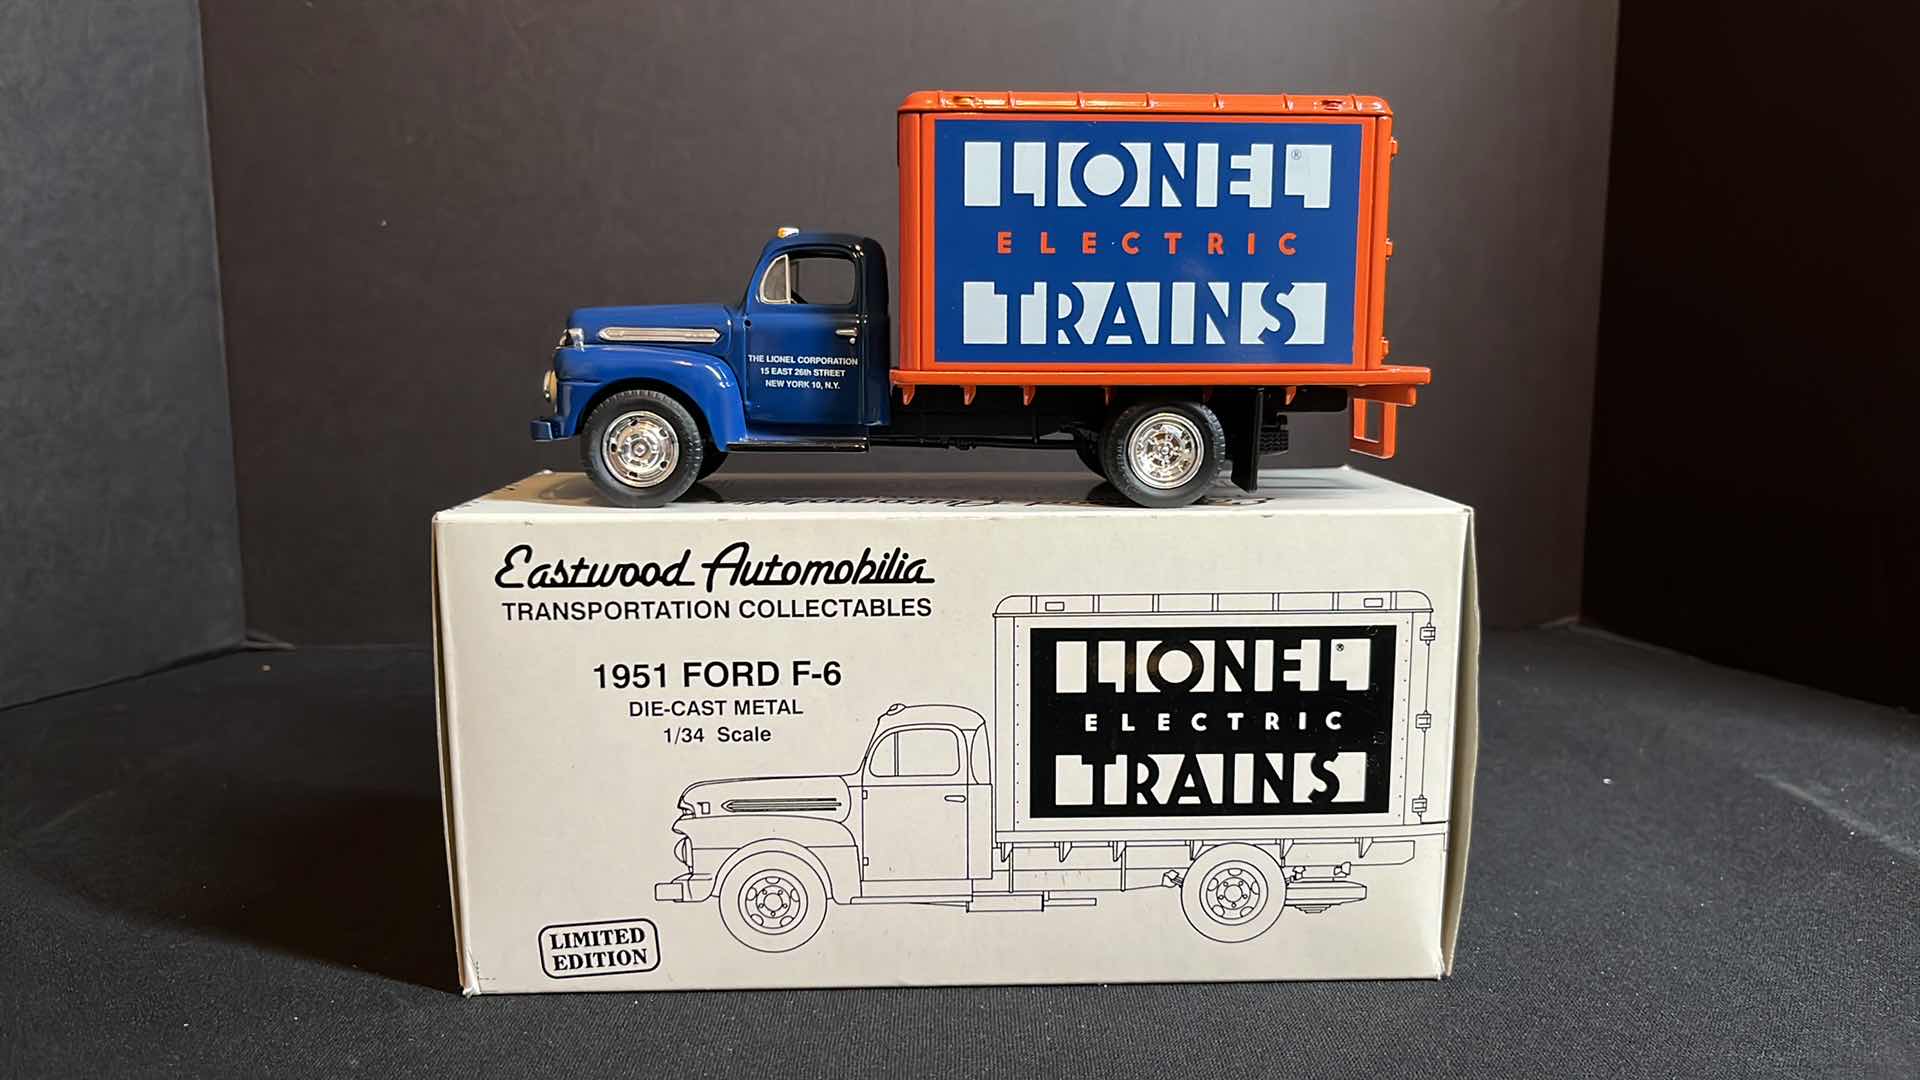 Photo 1 of NIB FIRST GEAR INC EASTWOOD AUTOMOBILIA TRANSPORTATION COLLECTABLES LIONEL ELECTRIC TRAINS DIE-CAST METAL 1/34 SCALE 1951 FORD F-6, 1992 (STOCK #19-0104)